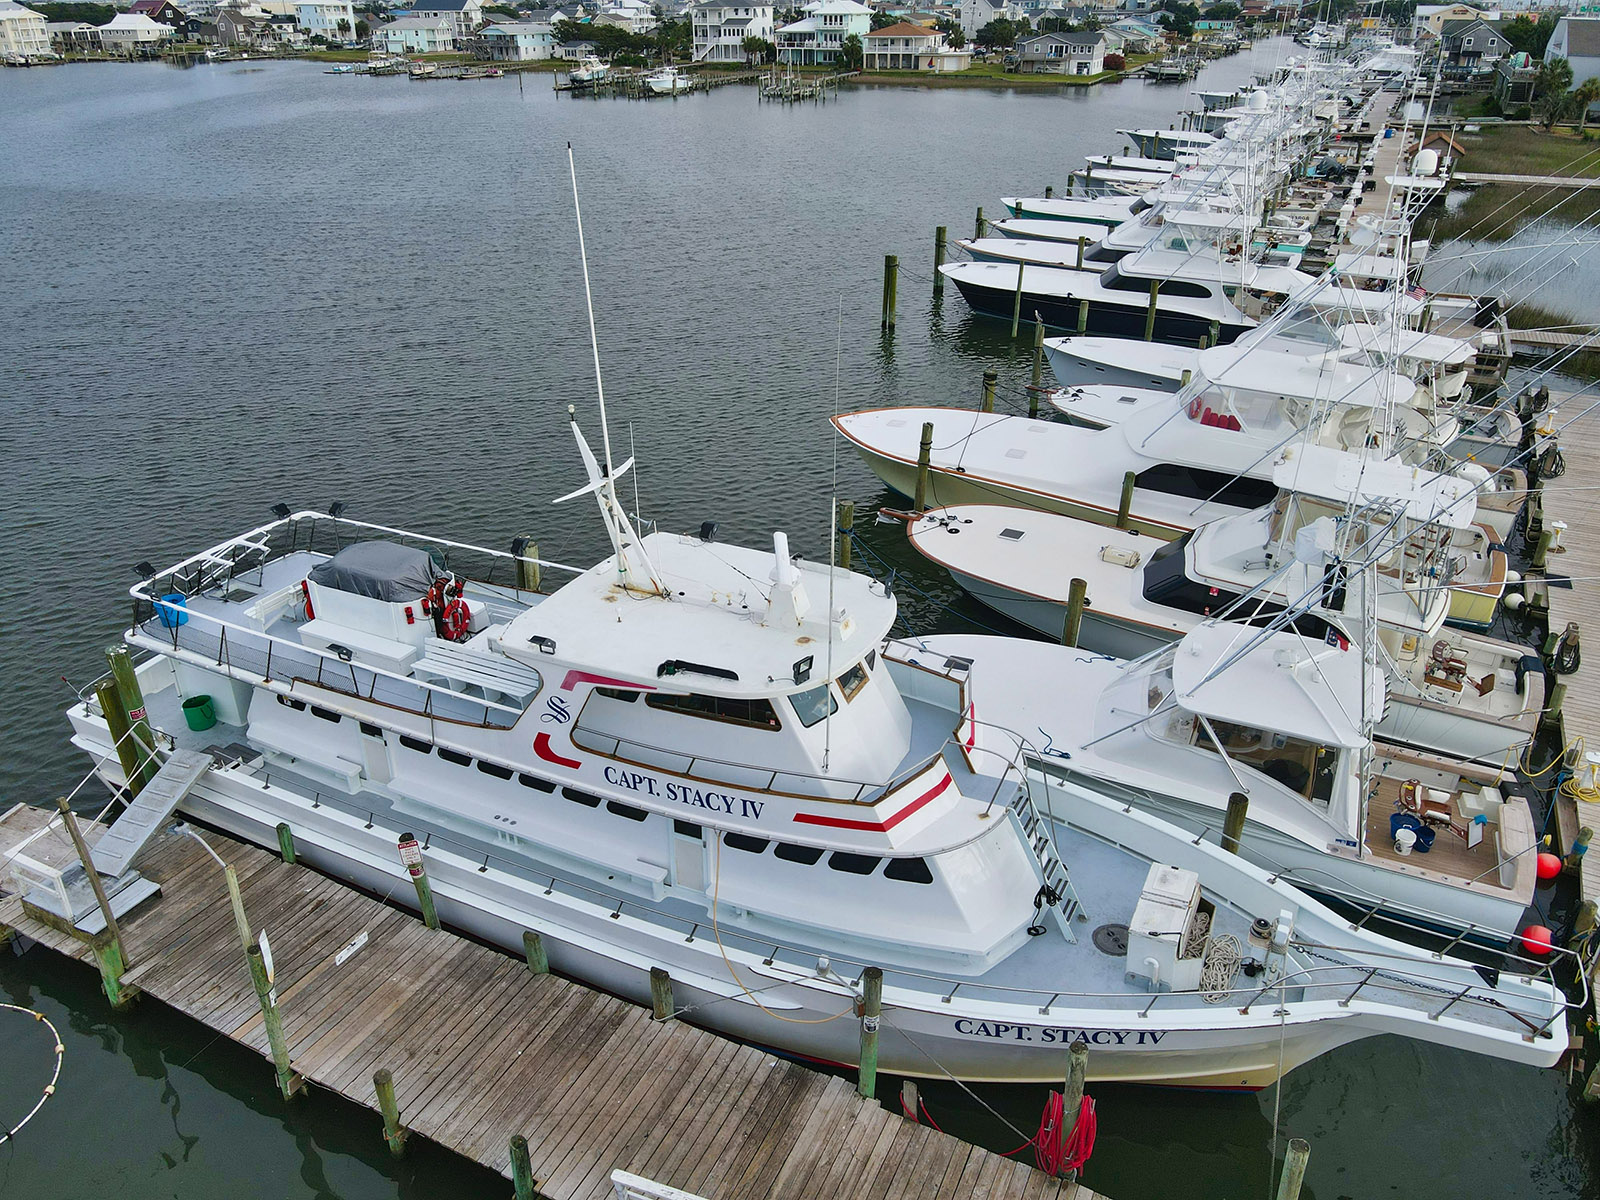 Photograph of rental yachts and motorboats at the dock to help you learn how to start a boat charter business.